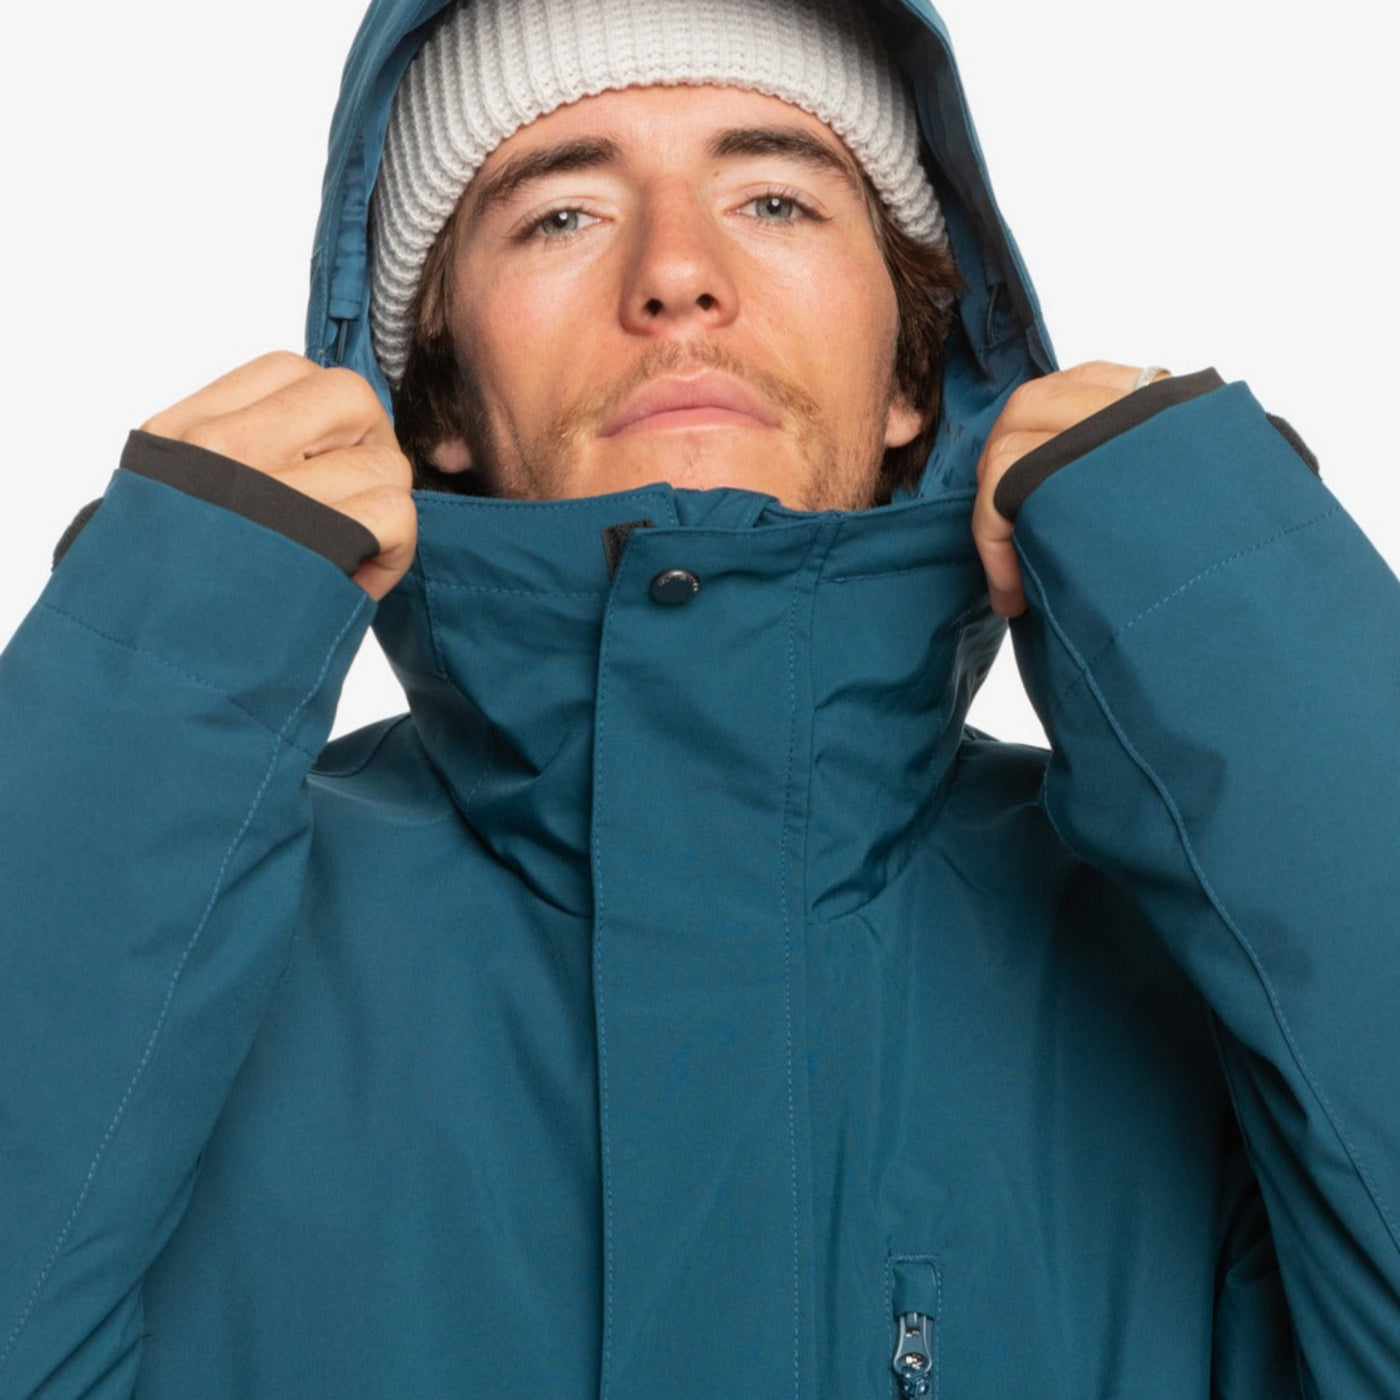 Quiksilver Mission Solid Snow Jacket - Majolica Blue